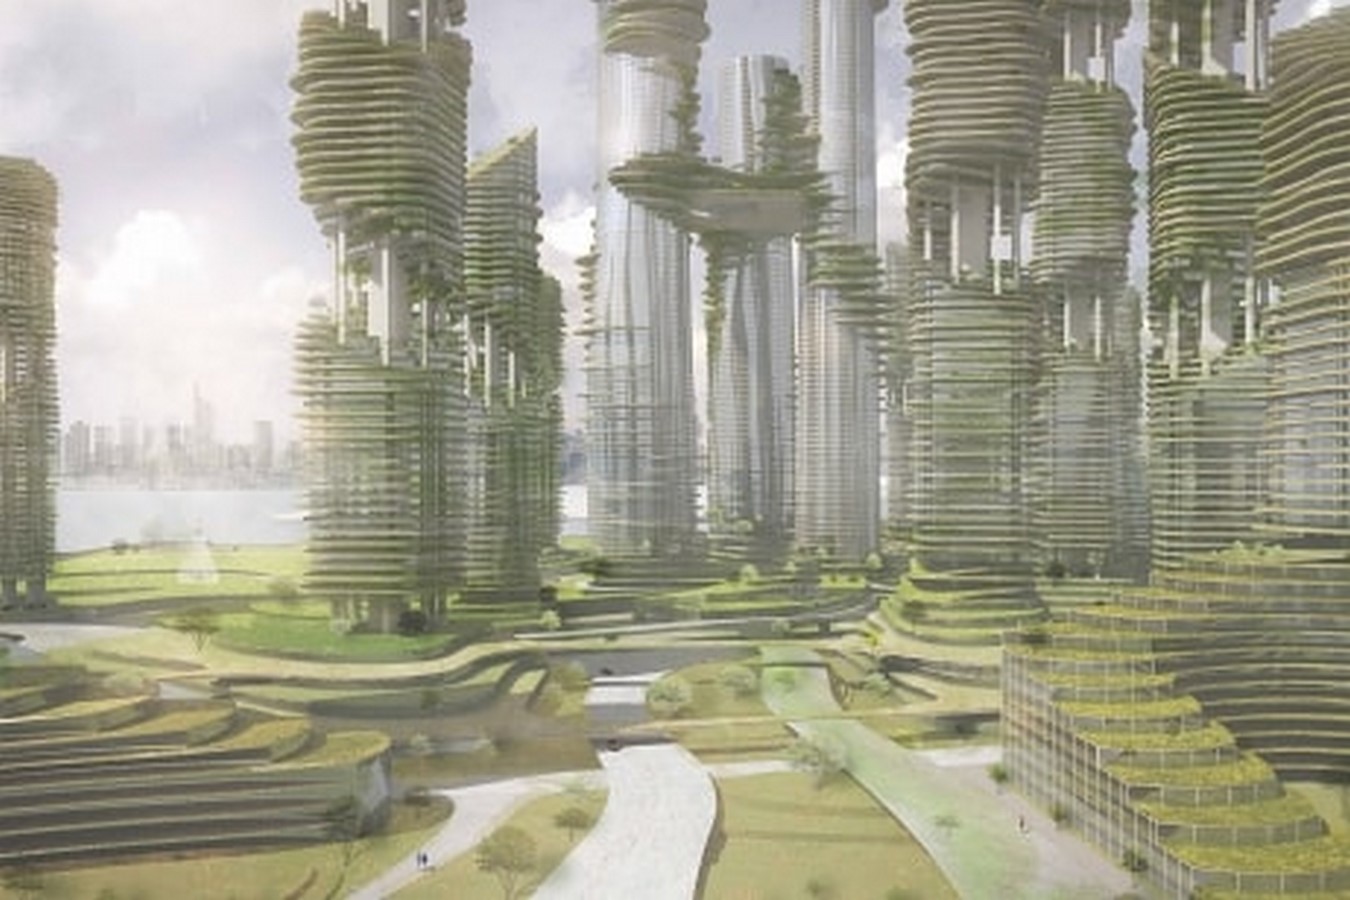 Will architects exist in 2035? - Sheet3